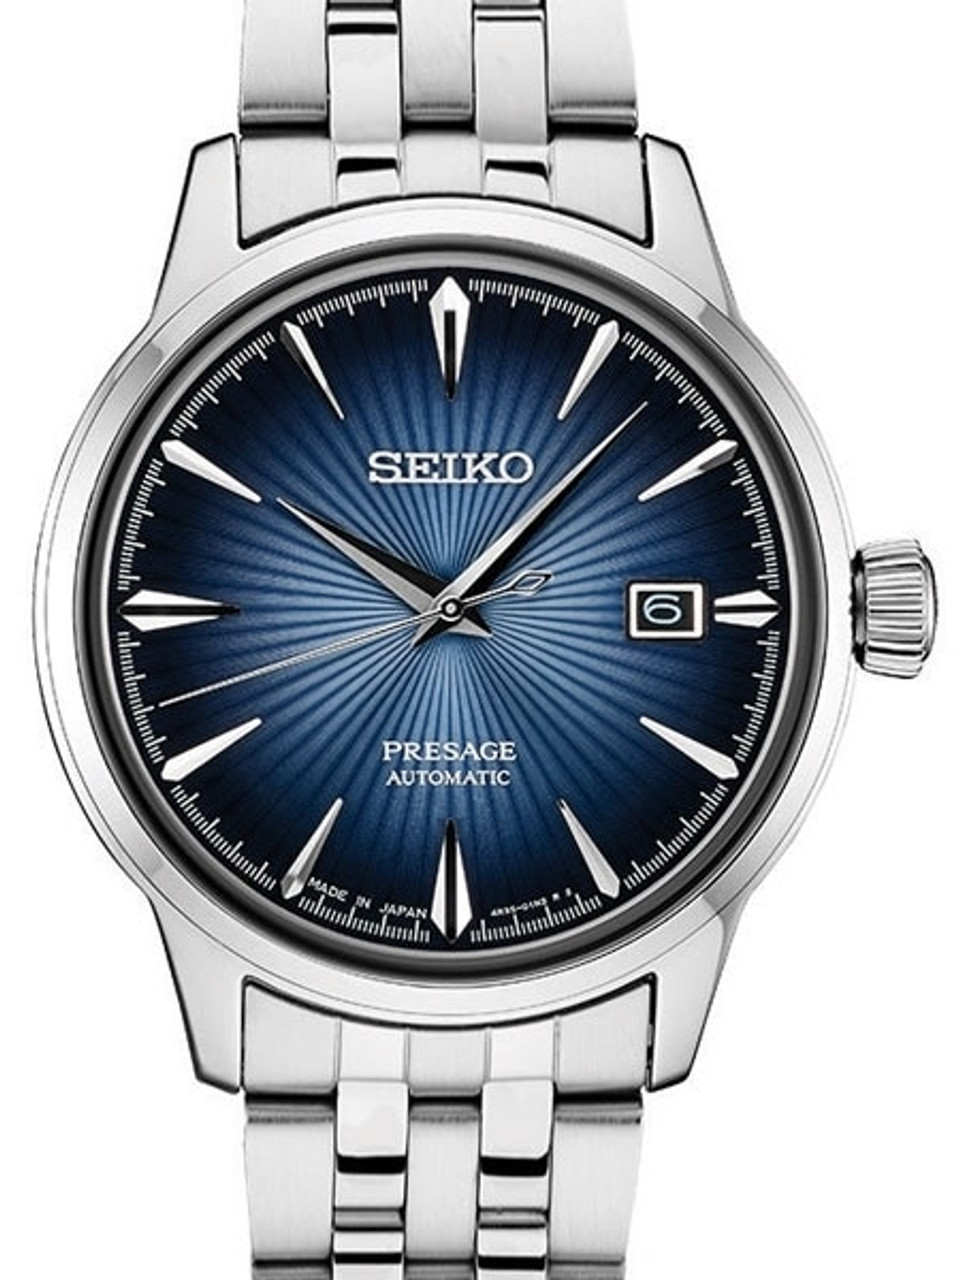 Seiko Presage "Cocktail Time" Automatic Dress Watch with mm Case